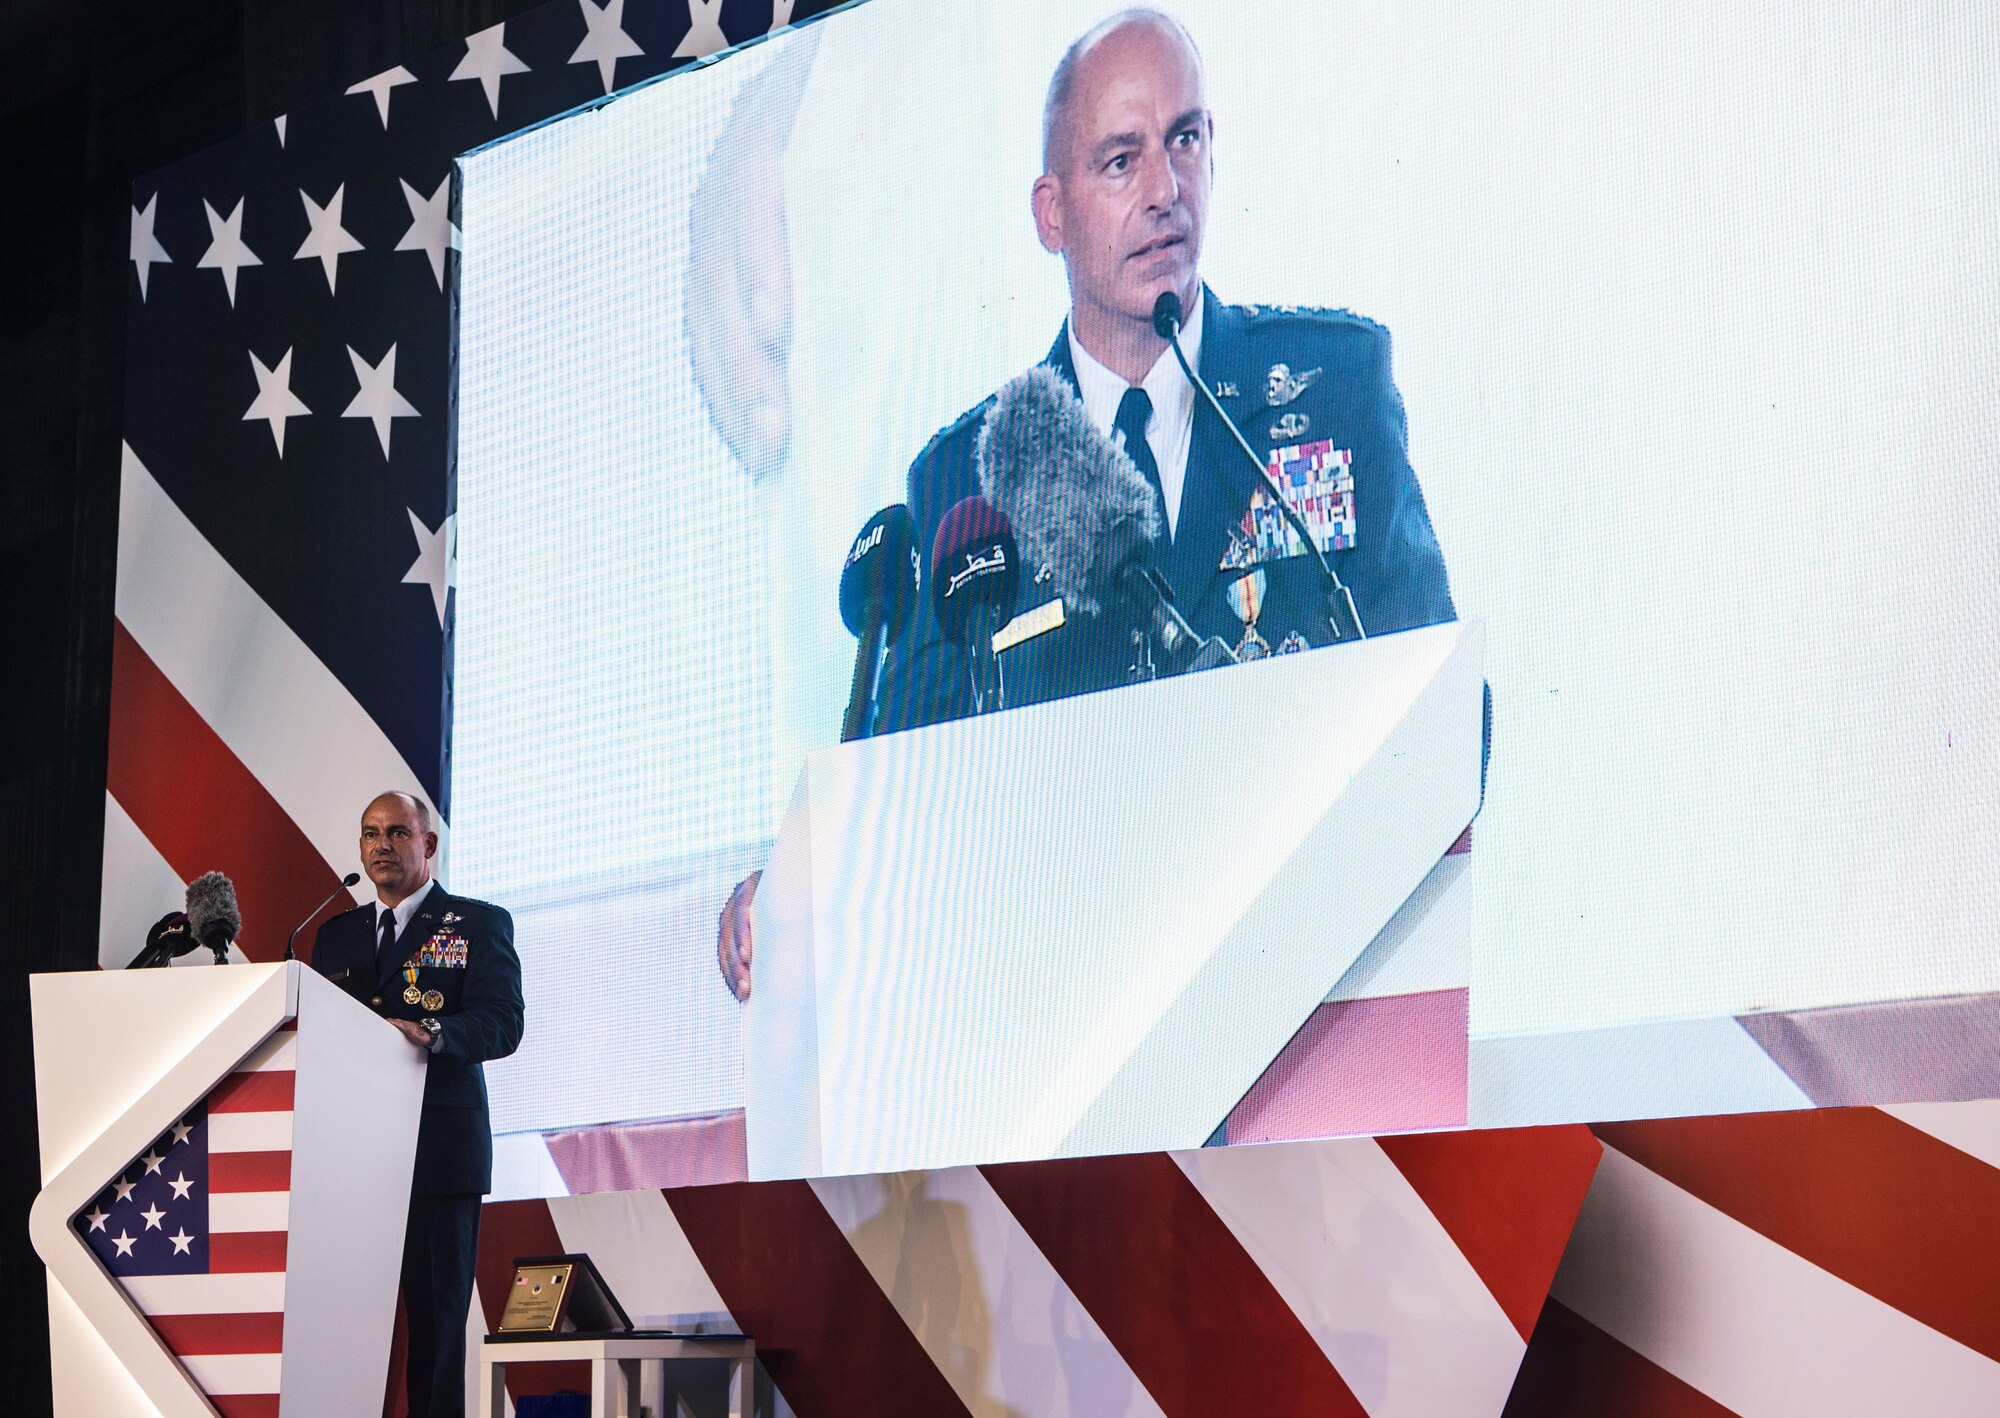 U.S. Air Force Lt. Gen. Jeffrey L. Harrigian, outgoing Commander of U.S. Air Forces Central Command (AFCENT), speaks to attendees at a change of command ceremony at Al Udeid Air Base, Qatar, Aug. 30, 2018. Harrigian served as the AFCENT Commander and Combined Force Air Component Commander beginning in July 2016, and led U.S. and Coalition air operations against ISIS as part of Operation Inherent Resolve in Iraq and Syria and against the Taliban and terrorist networks in Afghanistan as part of Operation Freedom�s Sentinel and the NATO Resolute Support mission in Afghanistan. His next assignment will be as the Deputy Commander, U.S. Air Forces in Europe-Air Forces Africa, at Ramstein Air Base, Germany. (U.S. Air Force photo by XYZ/123)